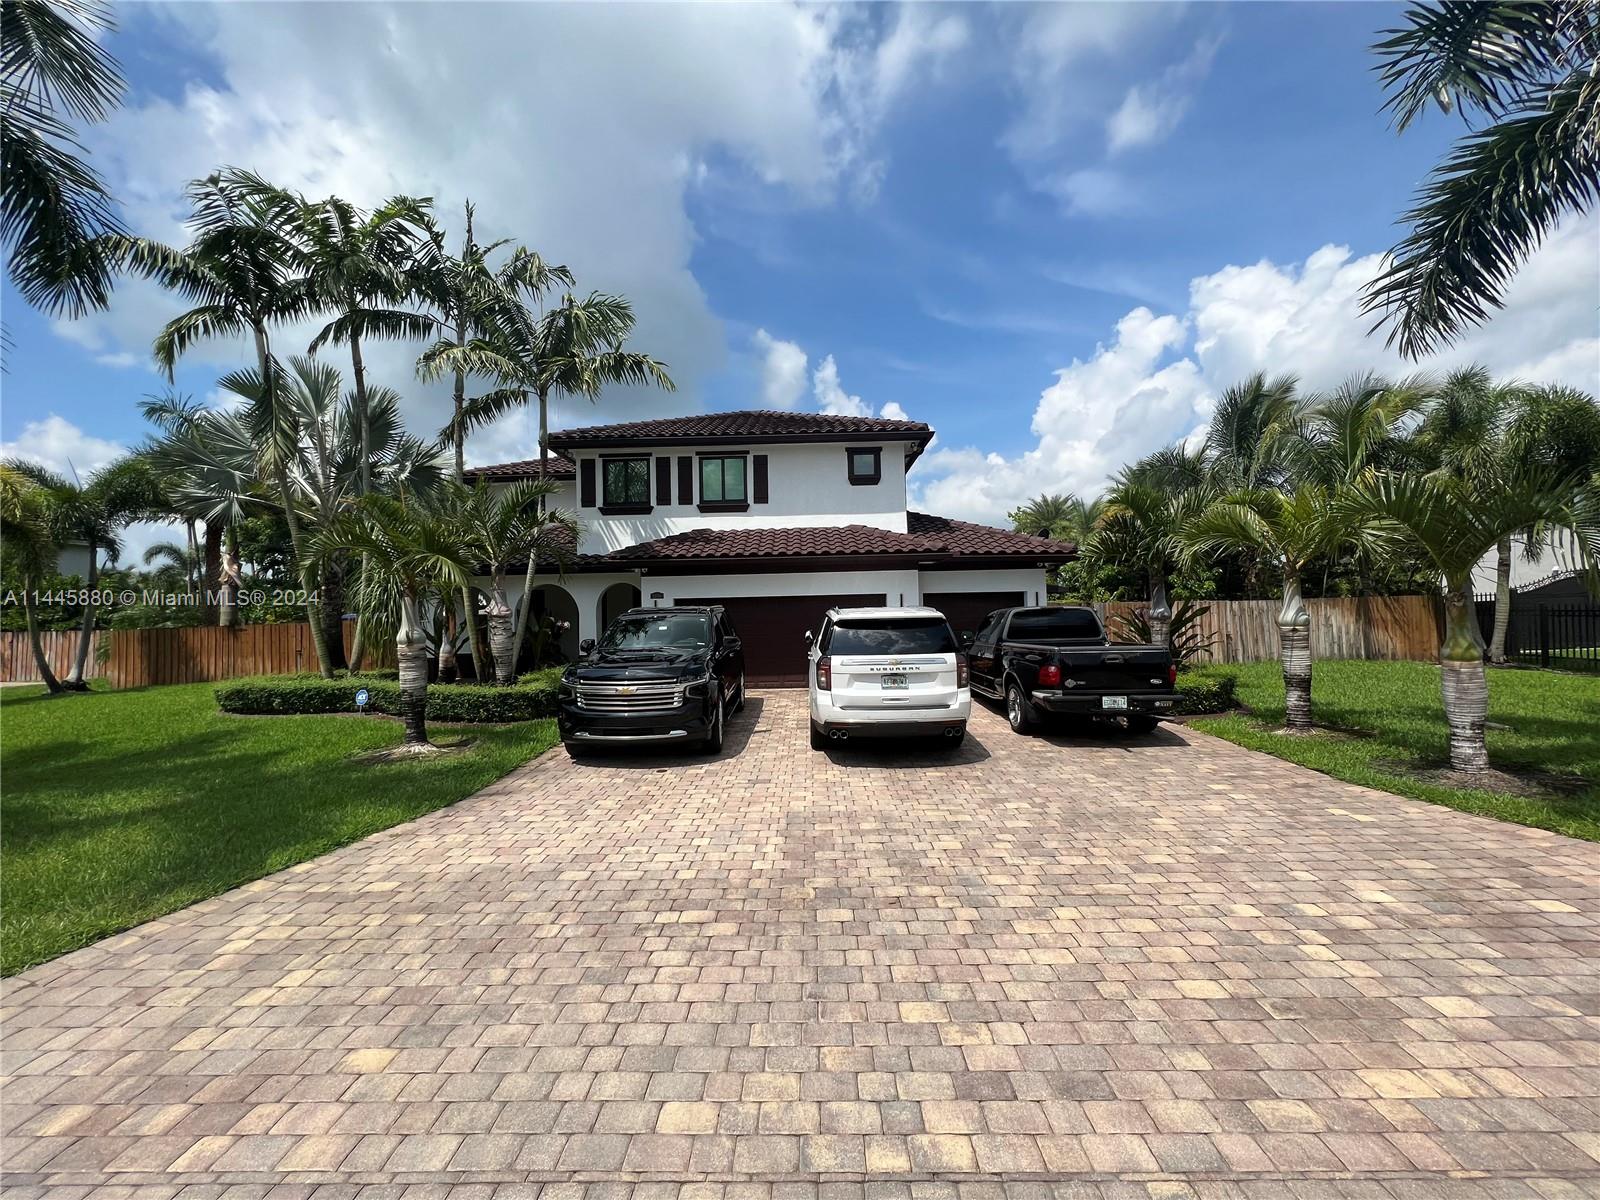 21046 SW 133rd Ct, Miami, Florida 33177, 5 Bedrooms Bedrooms, ,4 BathroomsBathrooms,Residential,For Sale,21046 SW 133rd Ct,A11445880